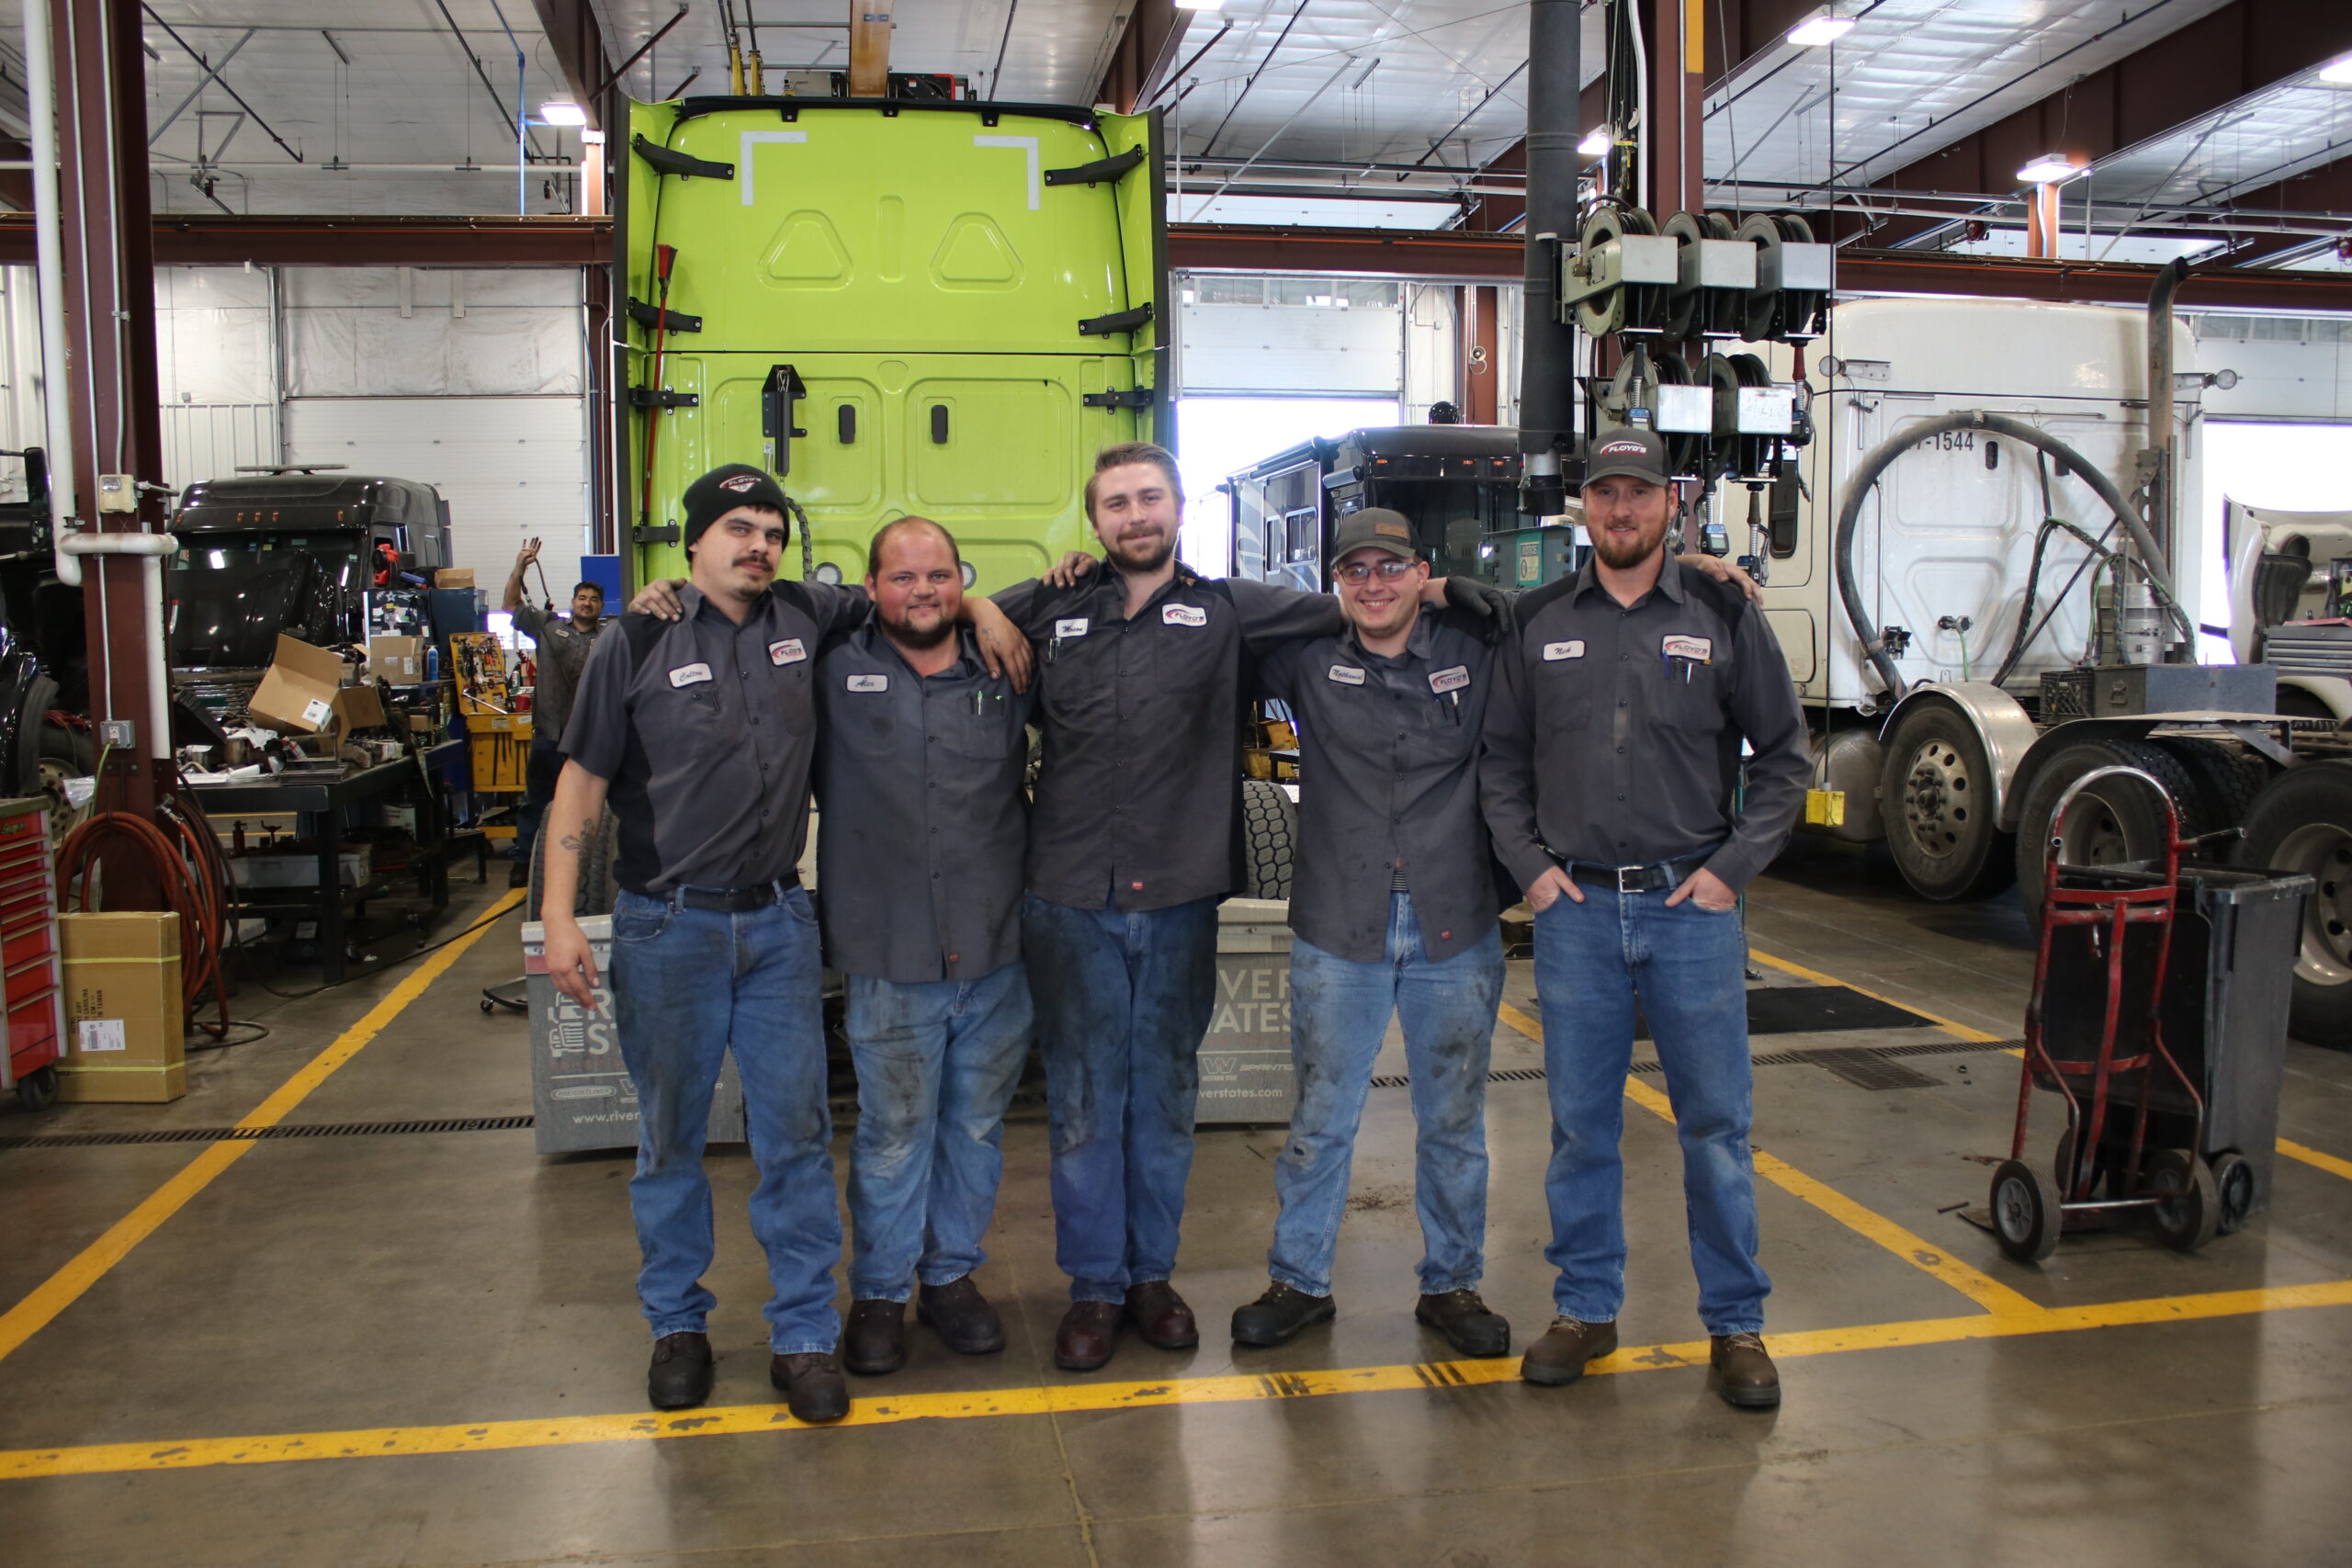 Several Floyd's Technicians who are WDTC Alumni pose for photo